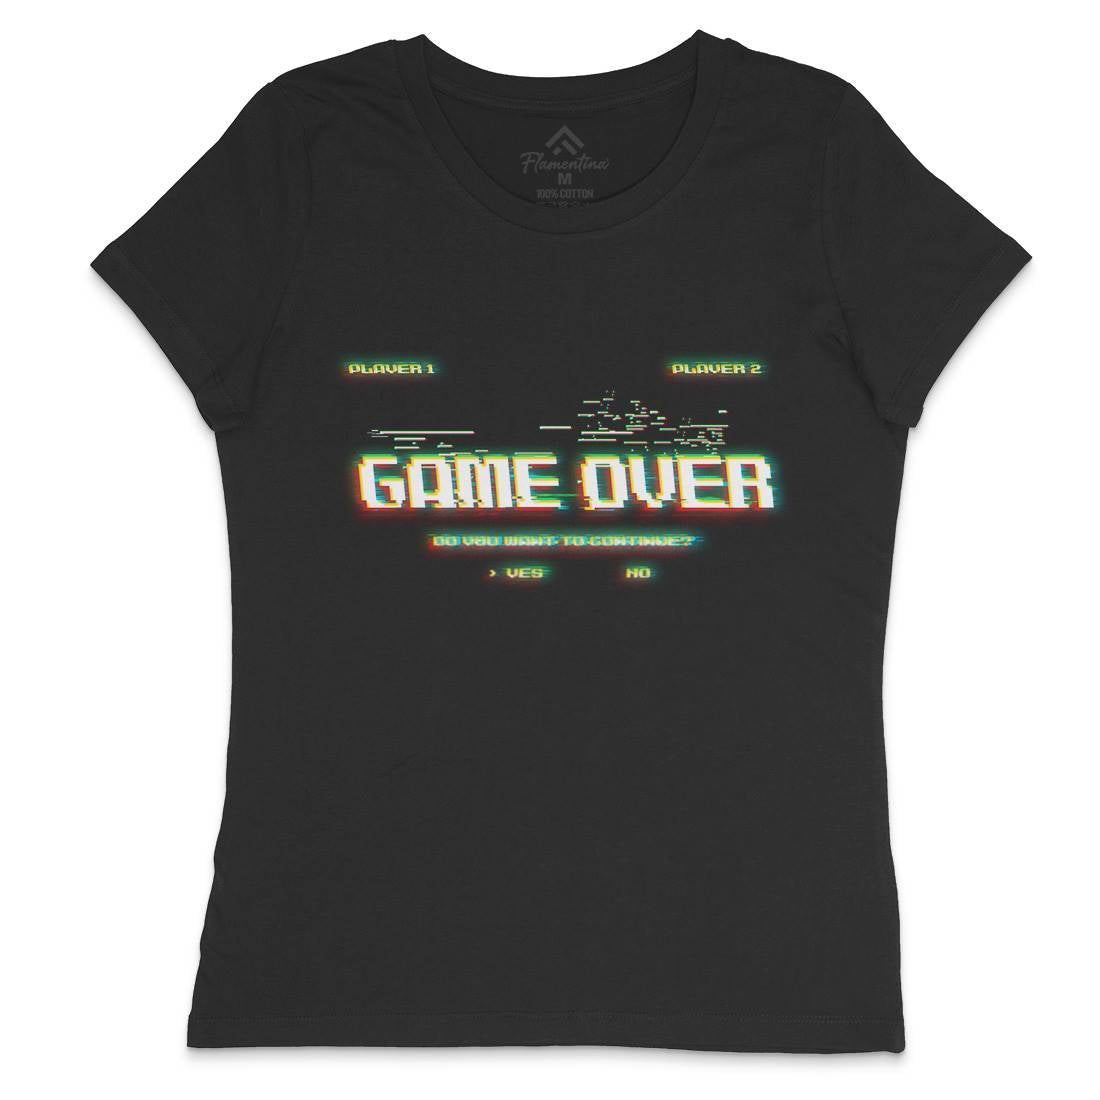 Game Over Continue Womens Crew Neck T-Shirt Geek B999